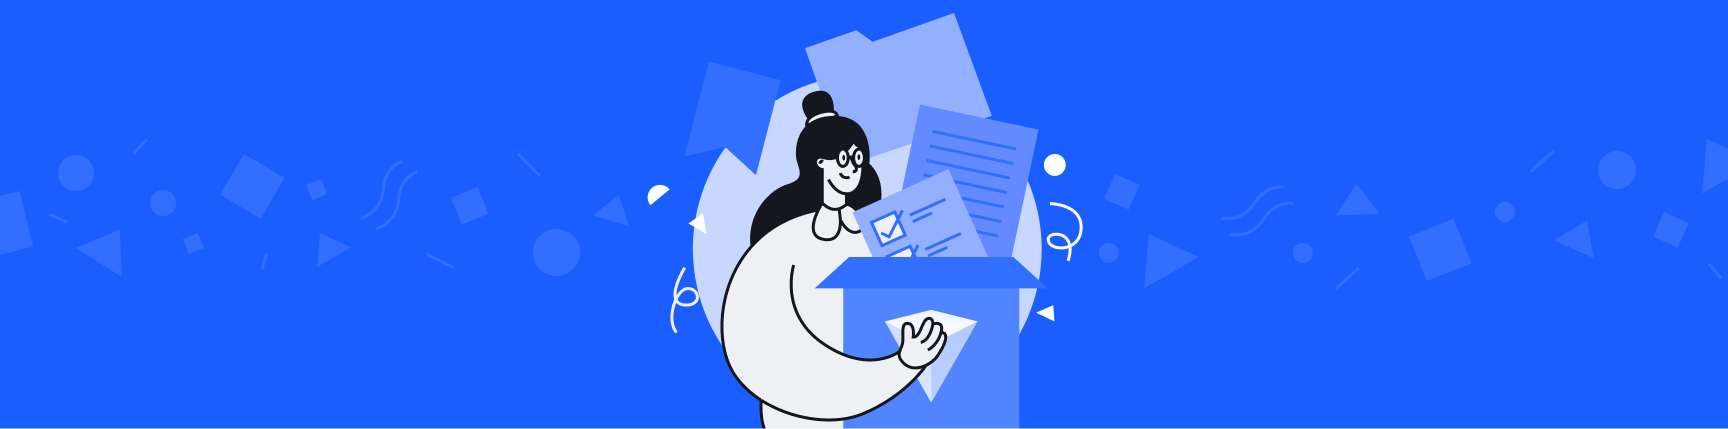 Illustrated figure on a blue background, holding a box filled with documents and tabs